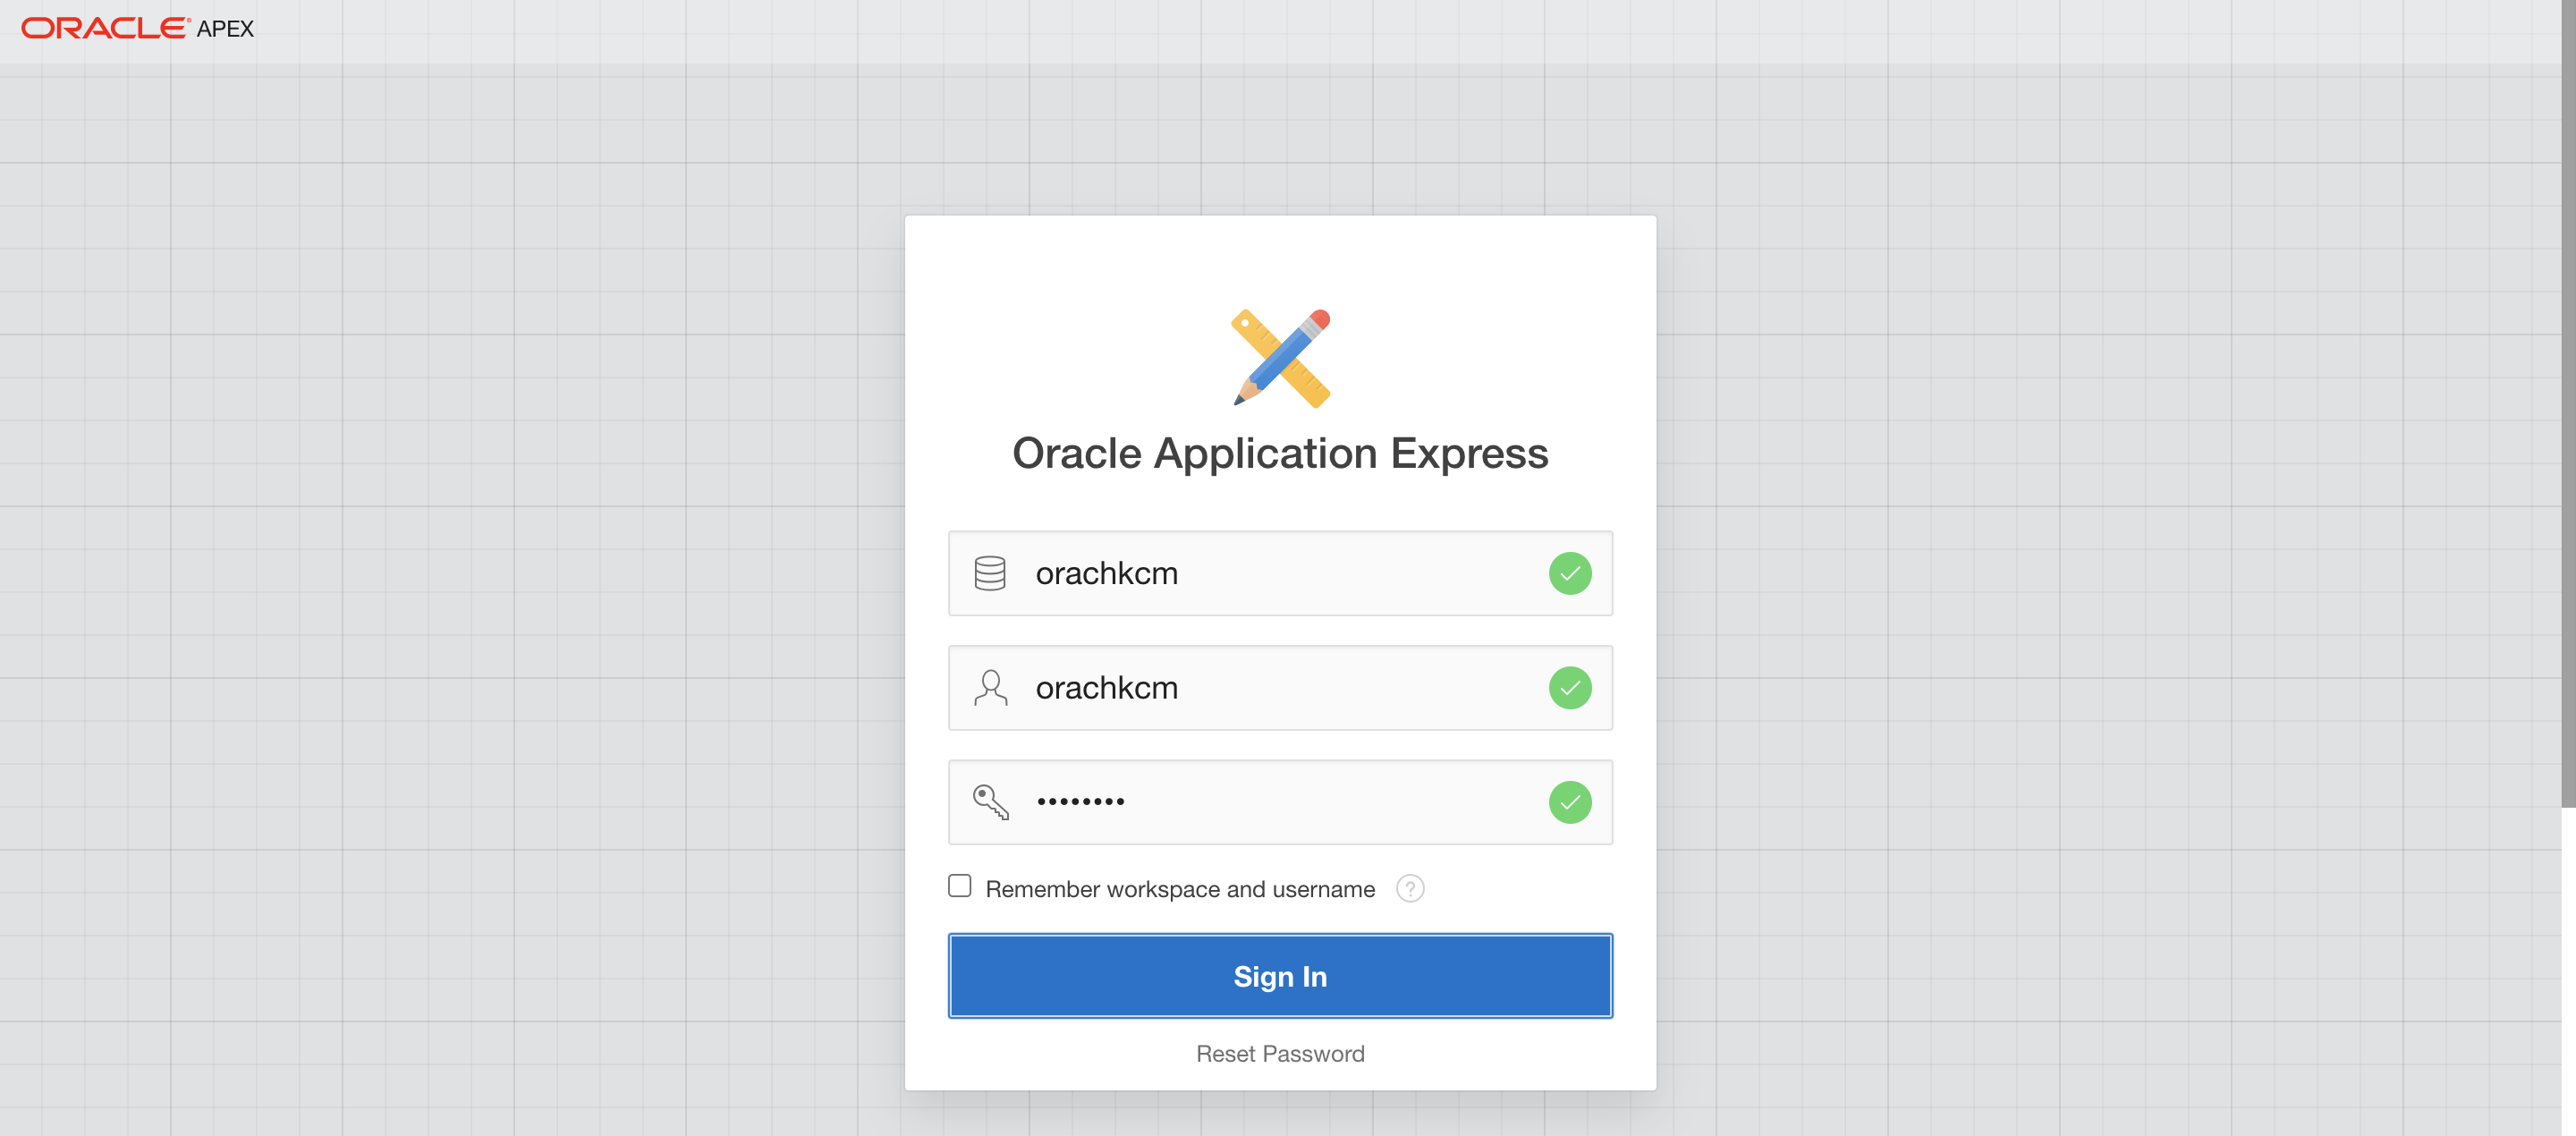 The image illustrates Oracle Application Express login.